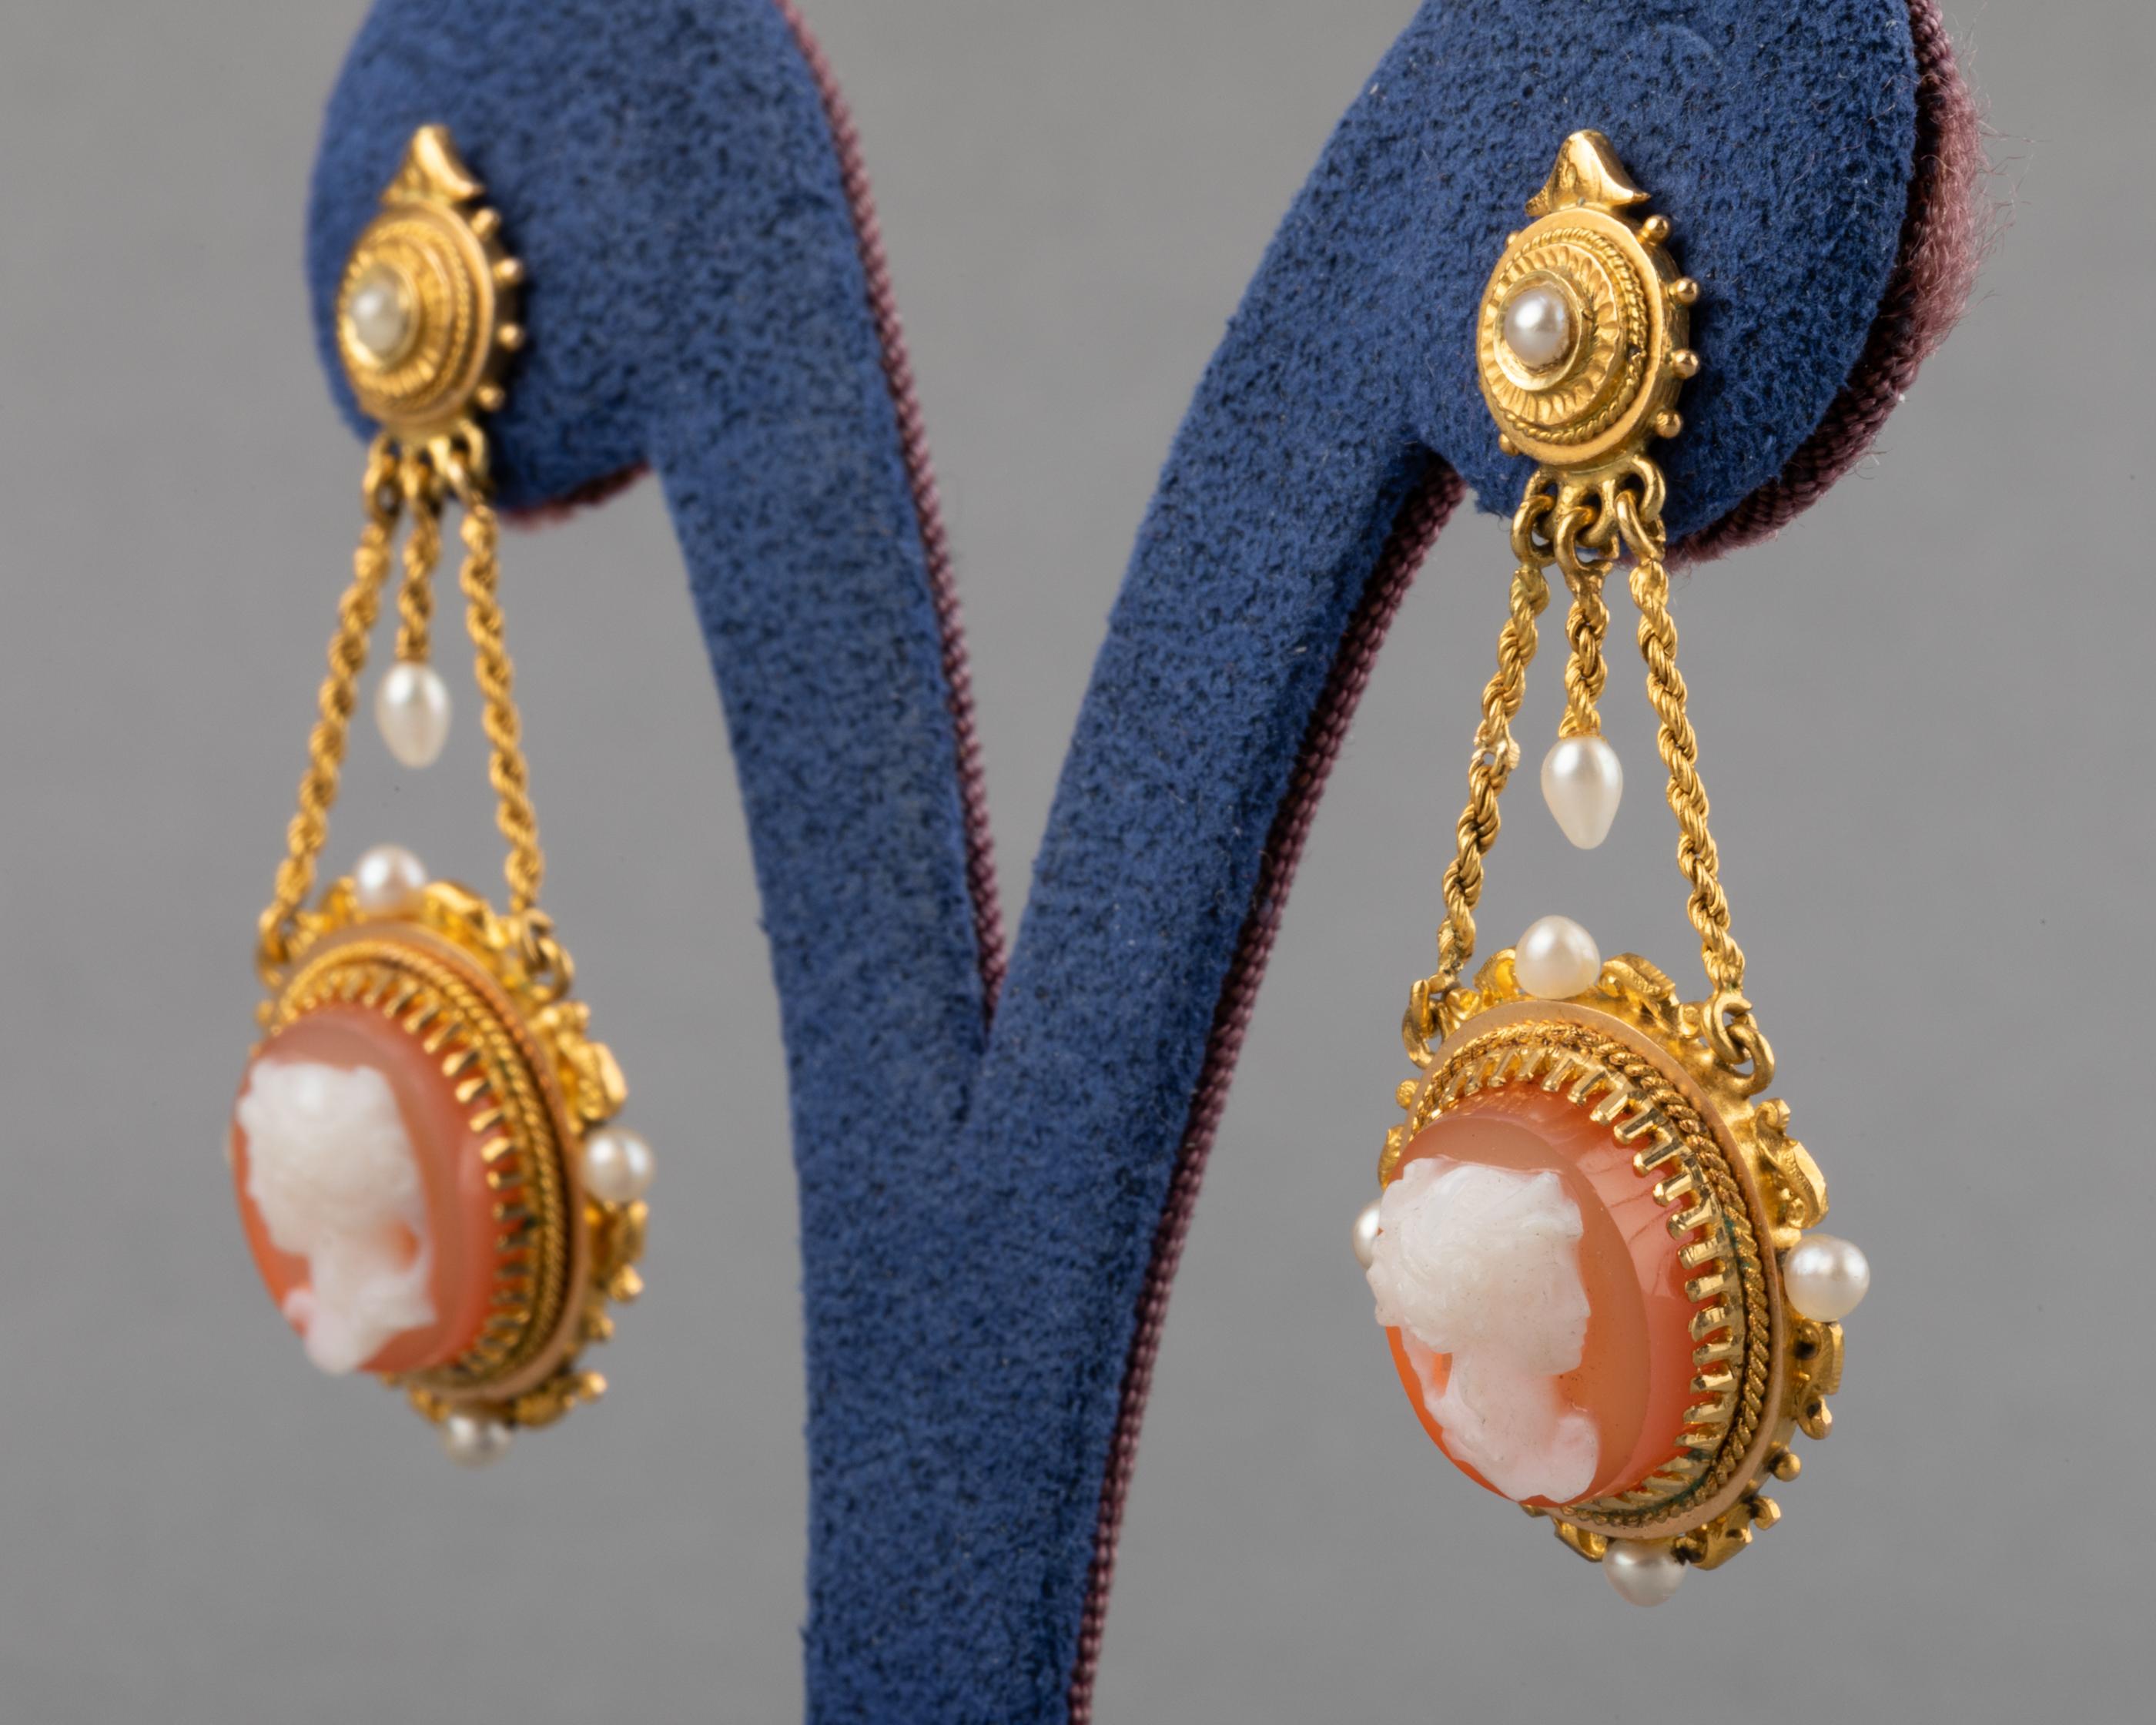 Gold and Agate Antique Napoleon III Earrings 

Very beautiful pair of antique earrings, made in France circa 1860.
Made in yellow gold 18k, two colors Agate Stone and pearls.
The cameos represent the profile of elegant Ladys.
Hallmark for gold 18k: